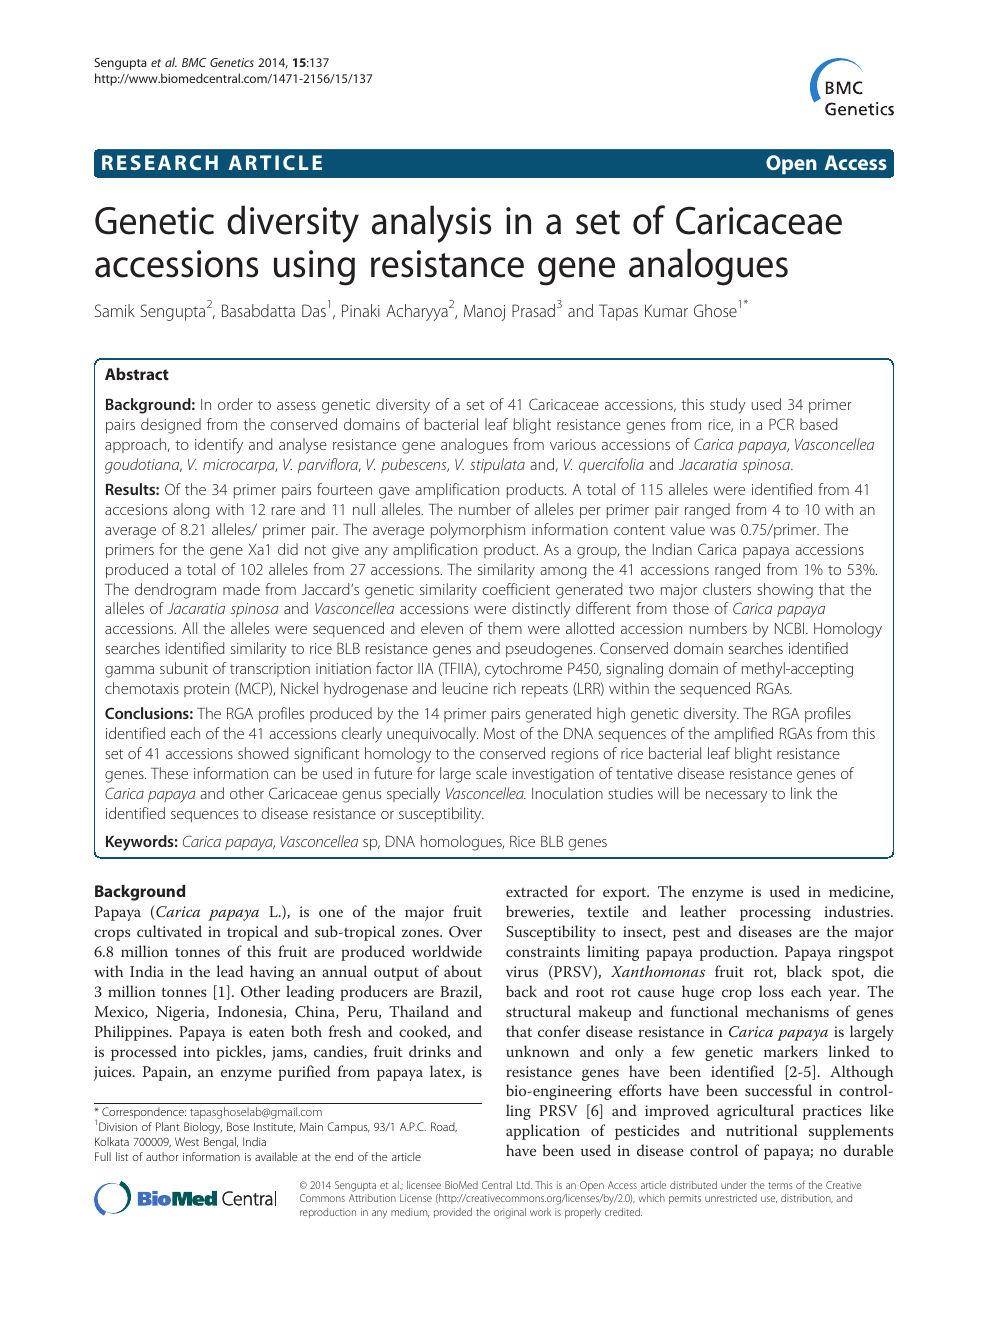 Genetic diversity analysis in a set of Caricaceae accessions using 